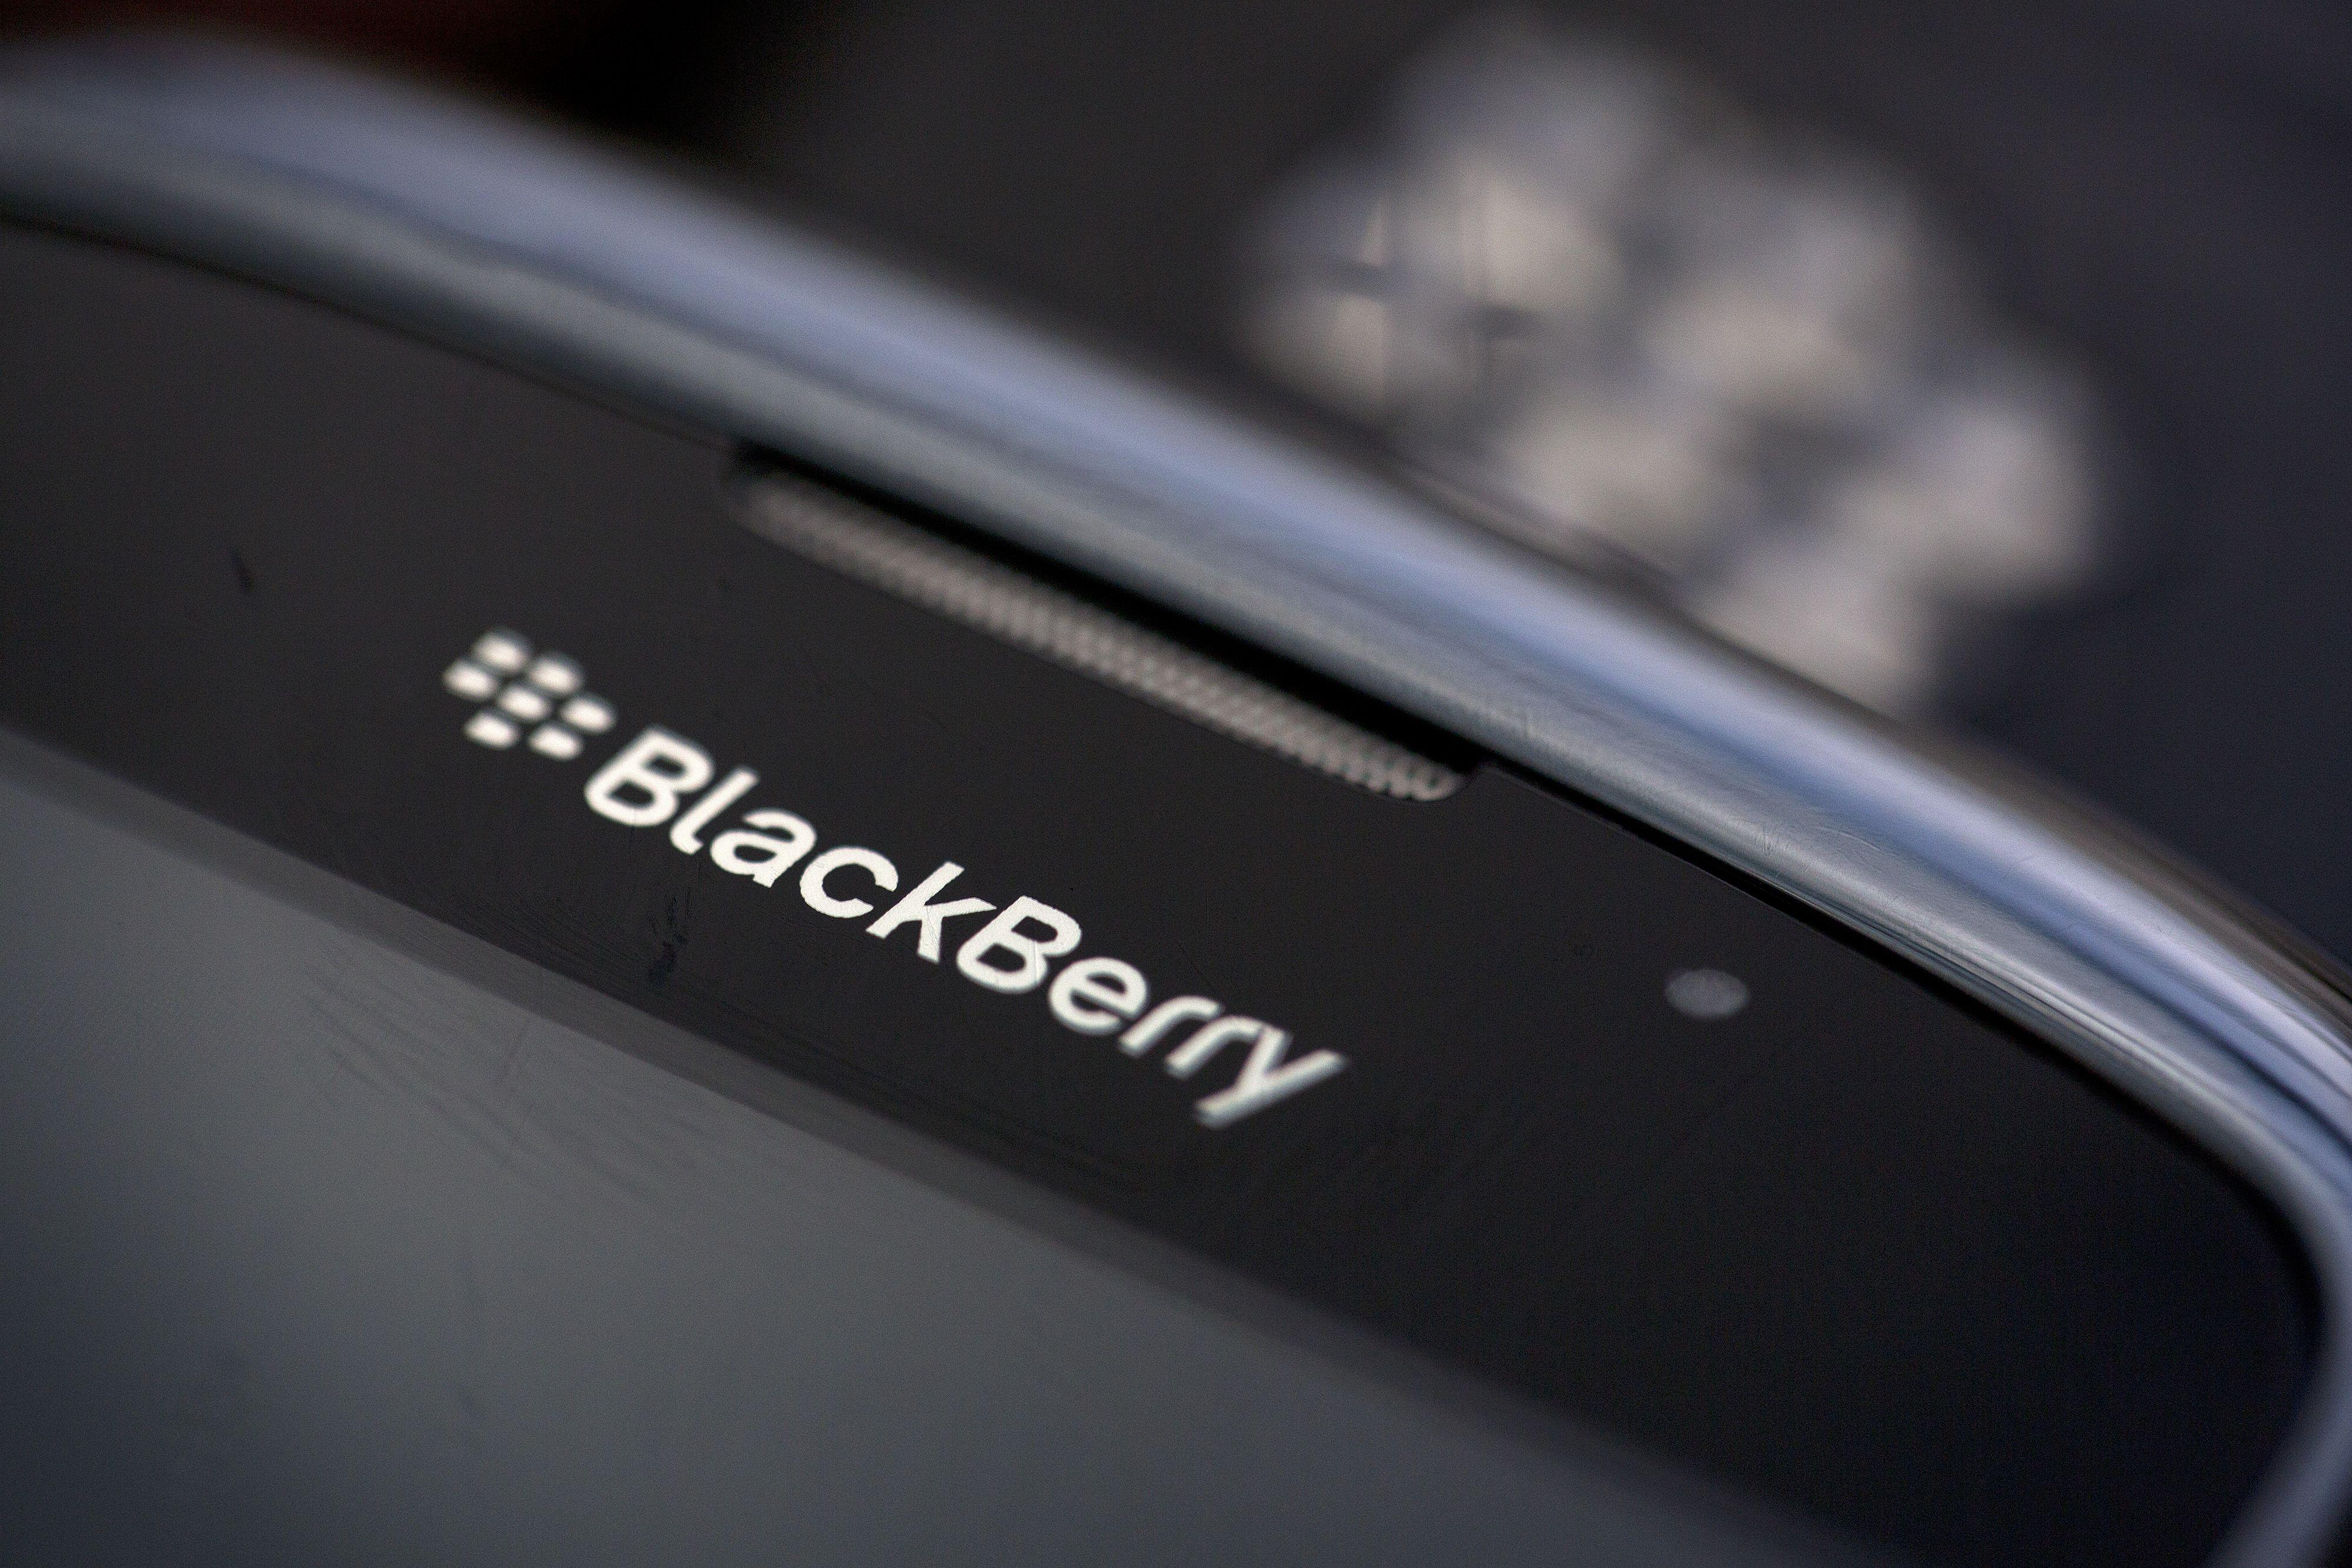 BlackBerry Company Logo - BlackBerry Wants to Secure Cars From Hackers With New Software | Fortune